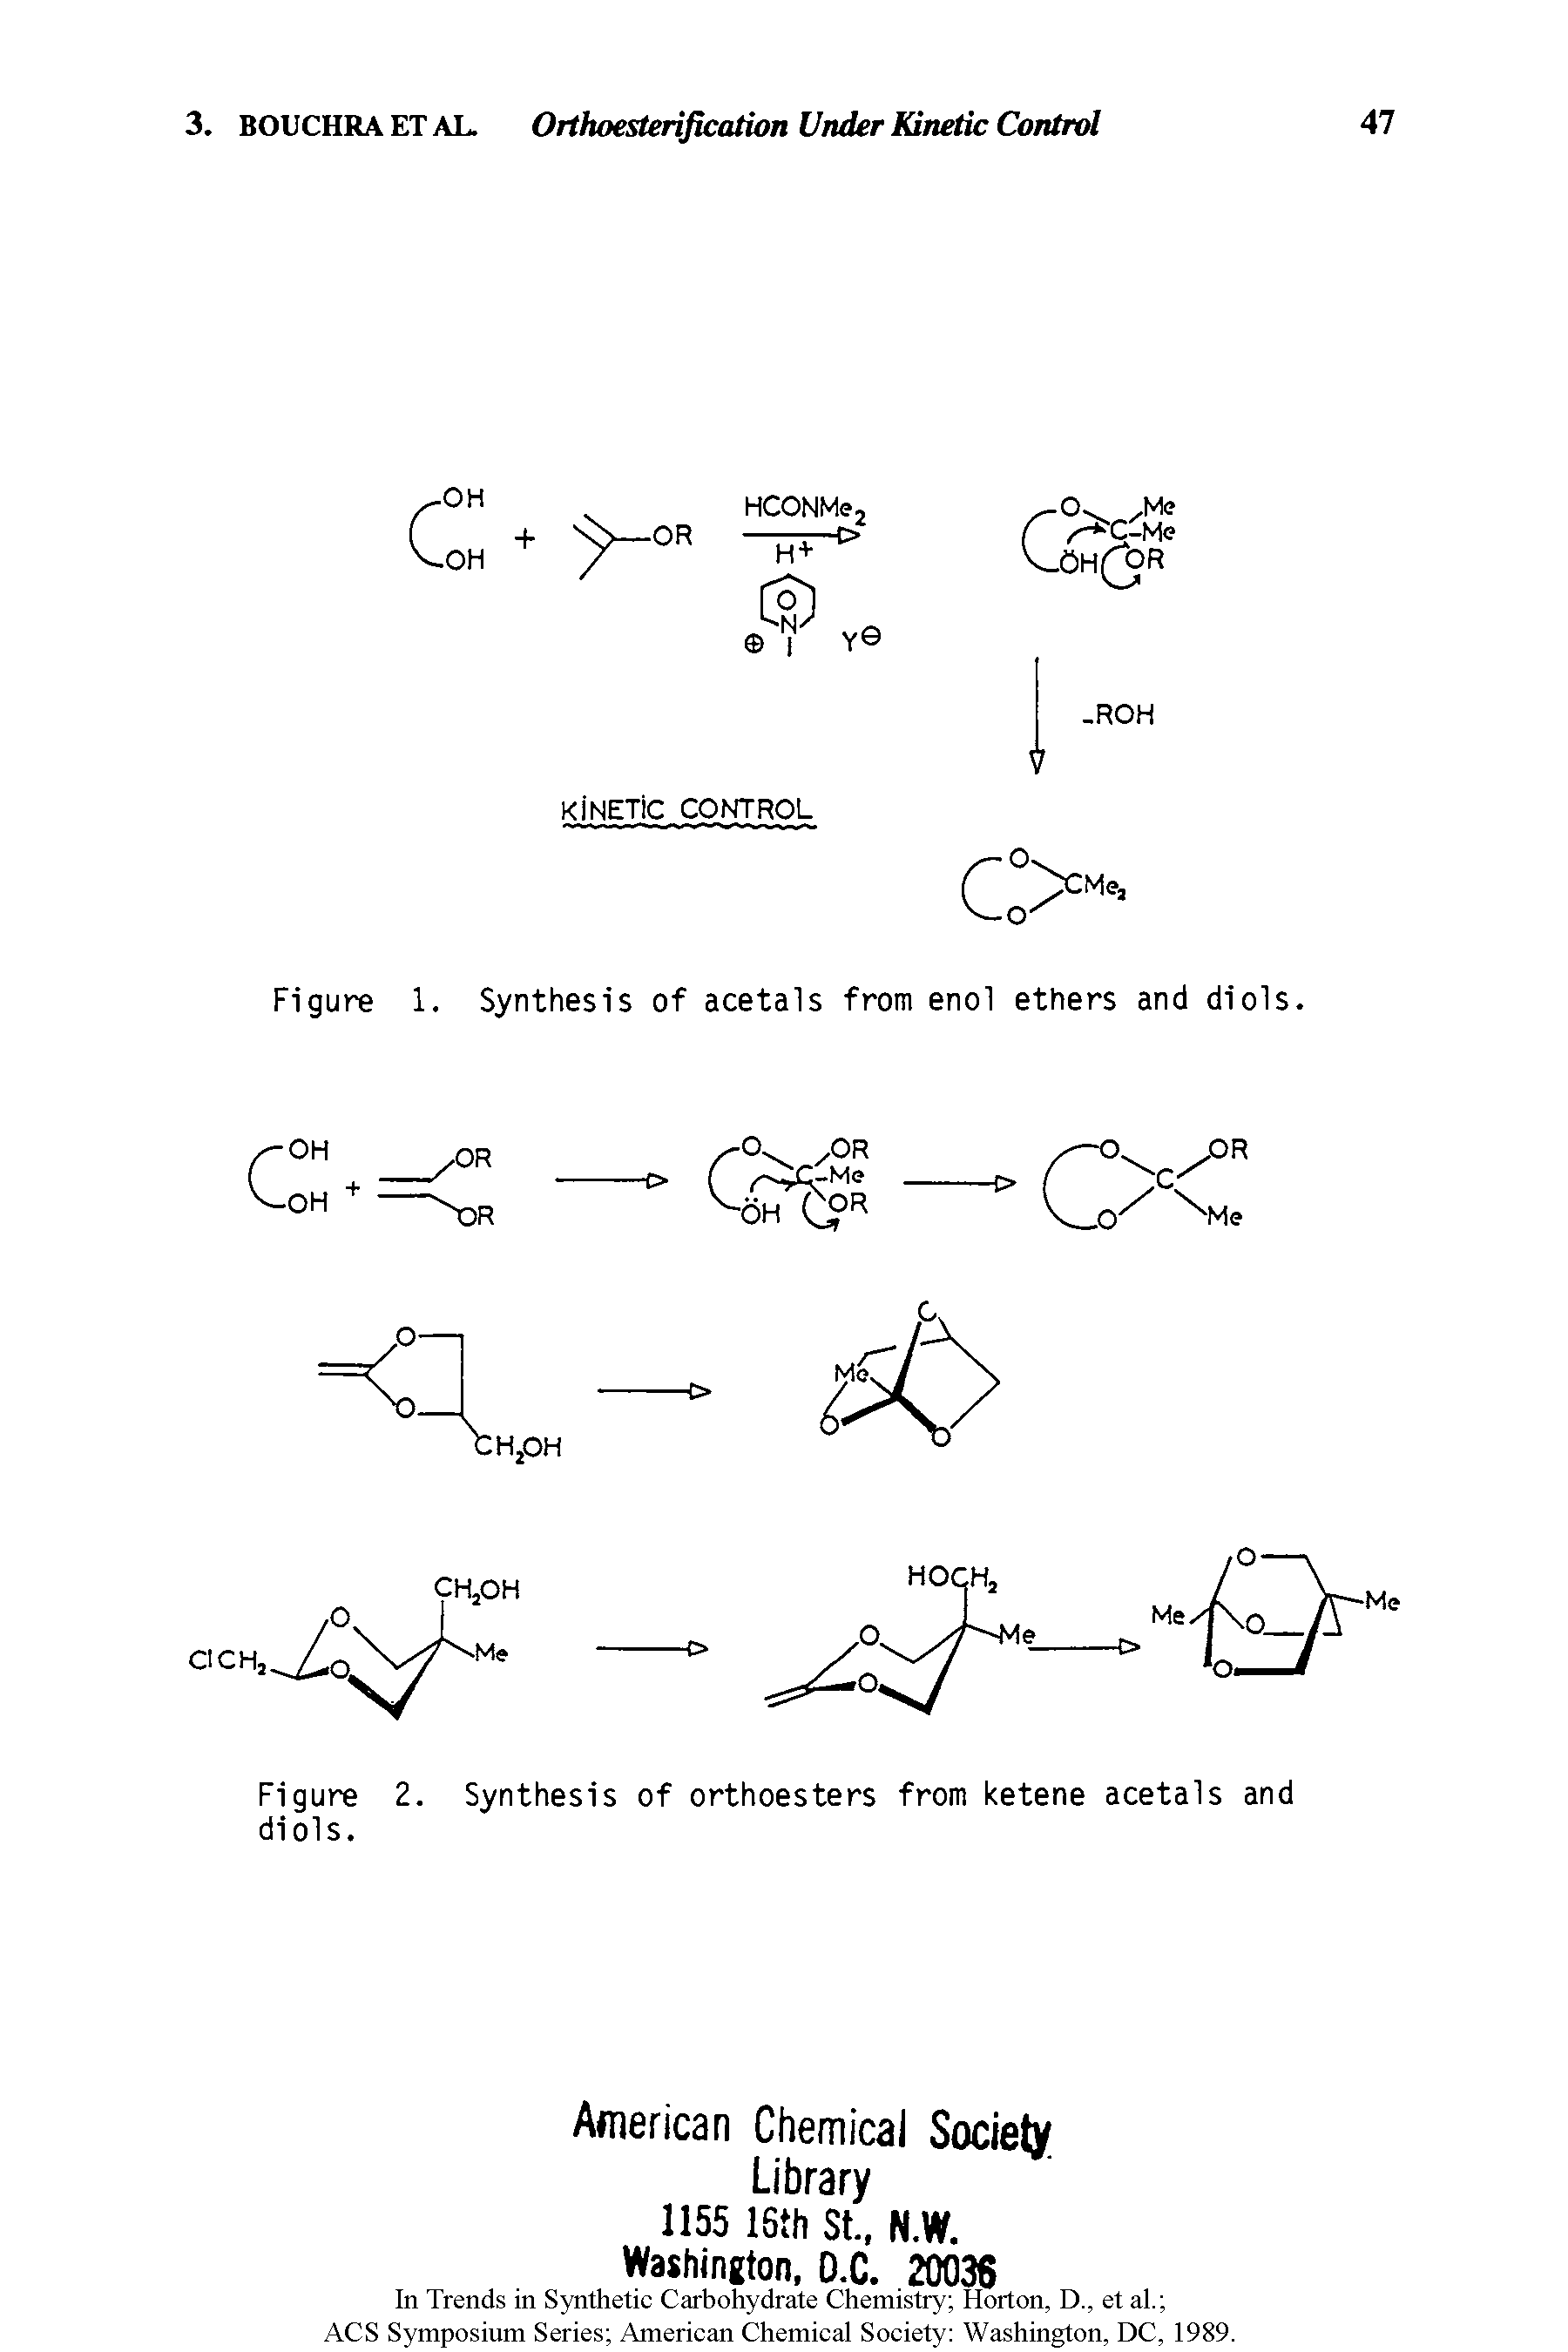 Figure 2. Synthesis of orthoesters from ketene acetals and diols.